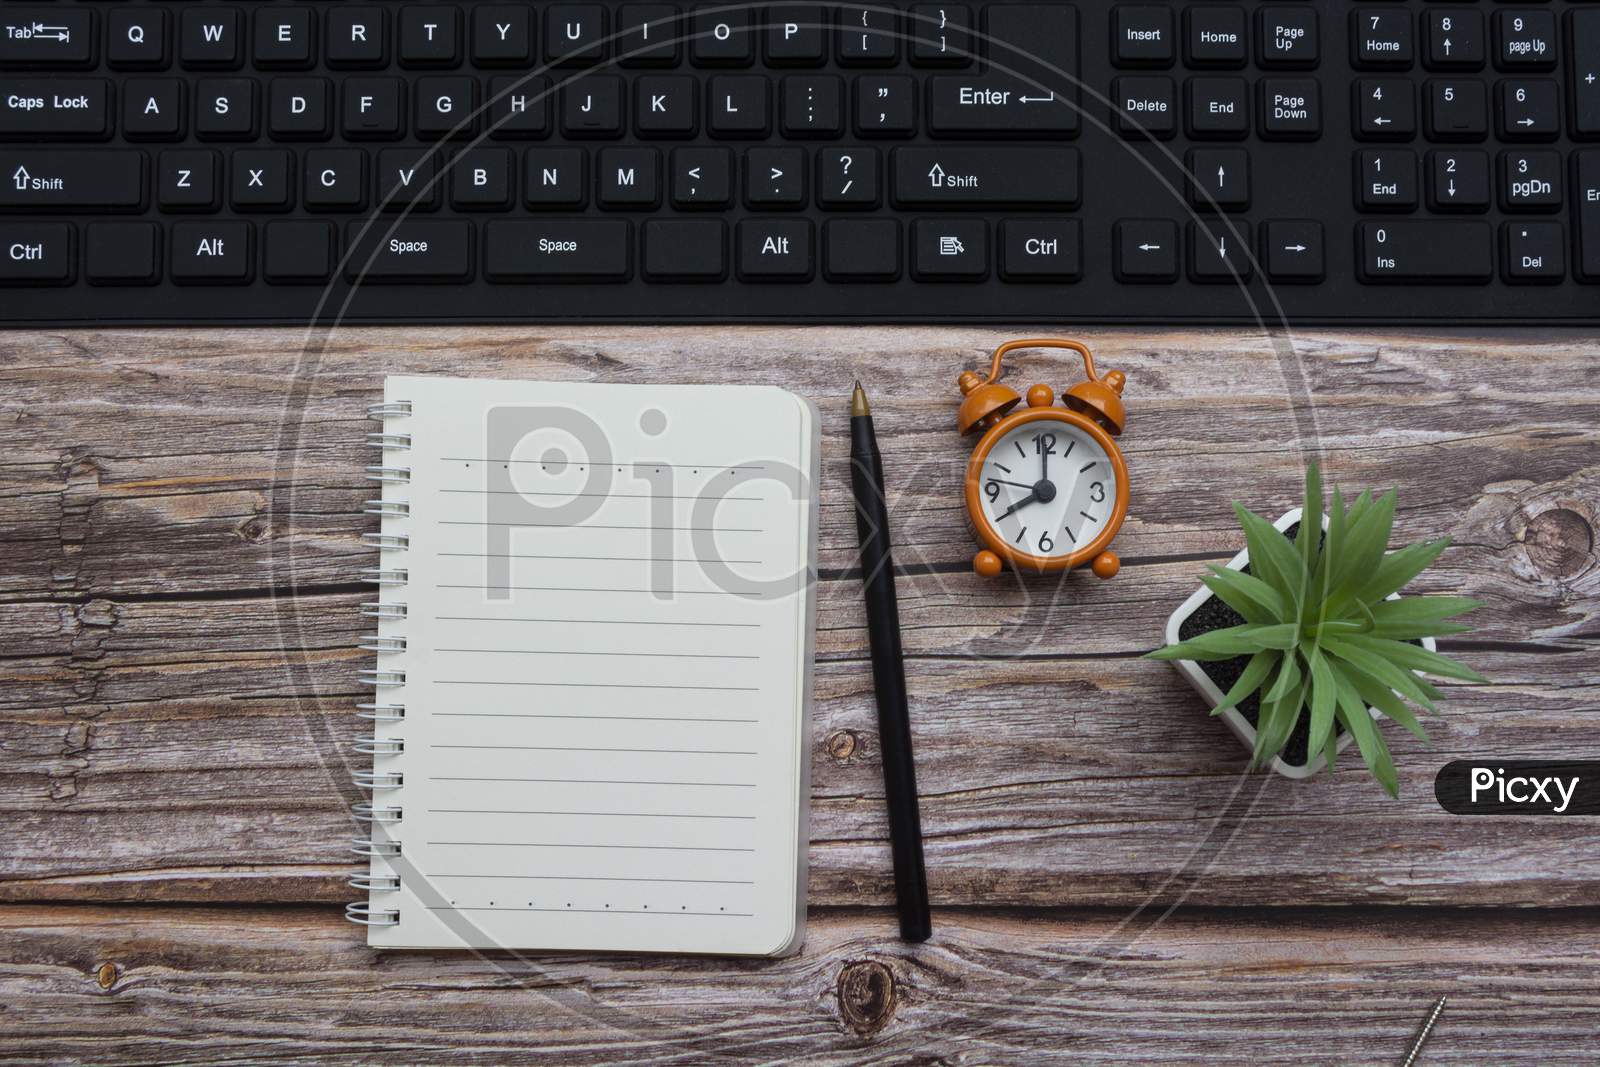 Notepad With Pen, Alarm Clock, Potted Plan And Keyboard On Wooden Desk